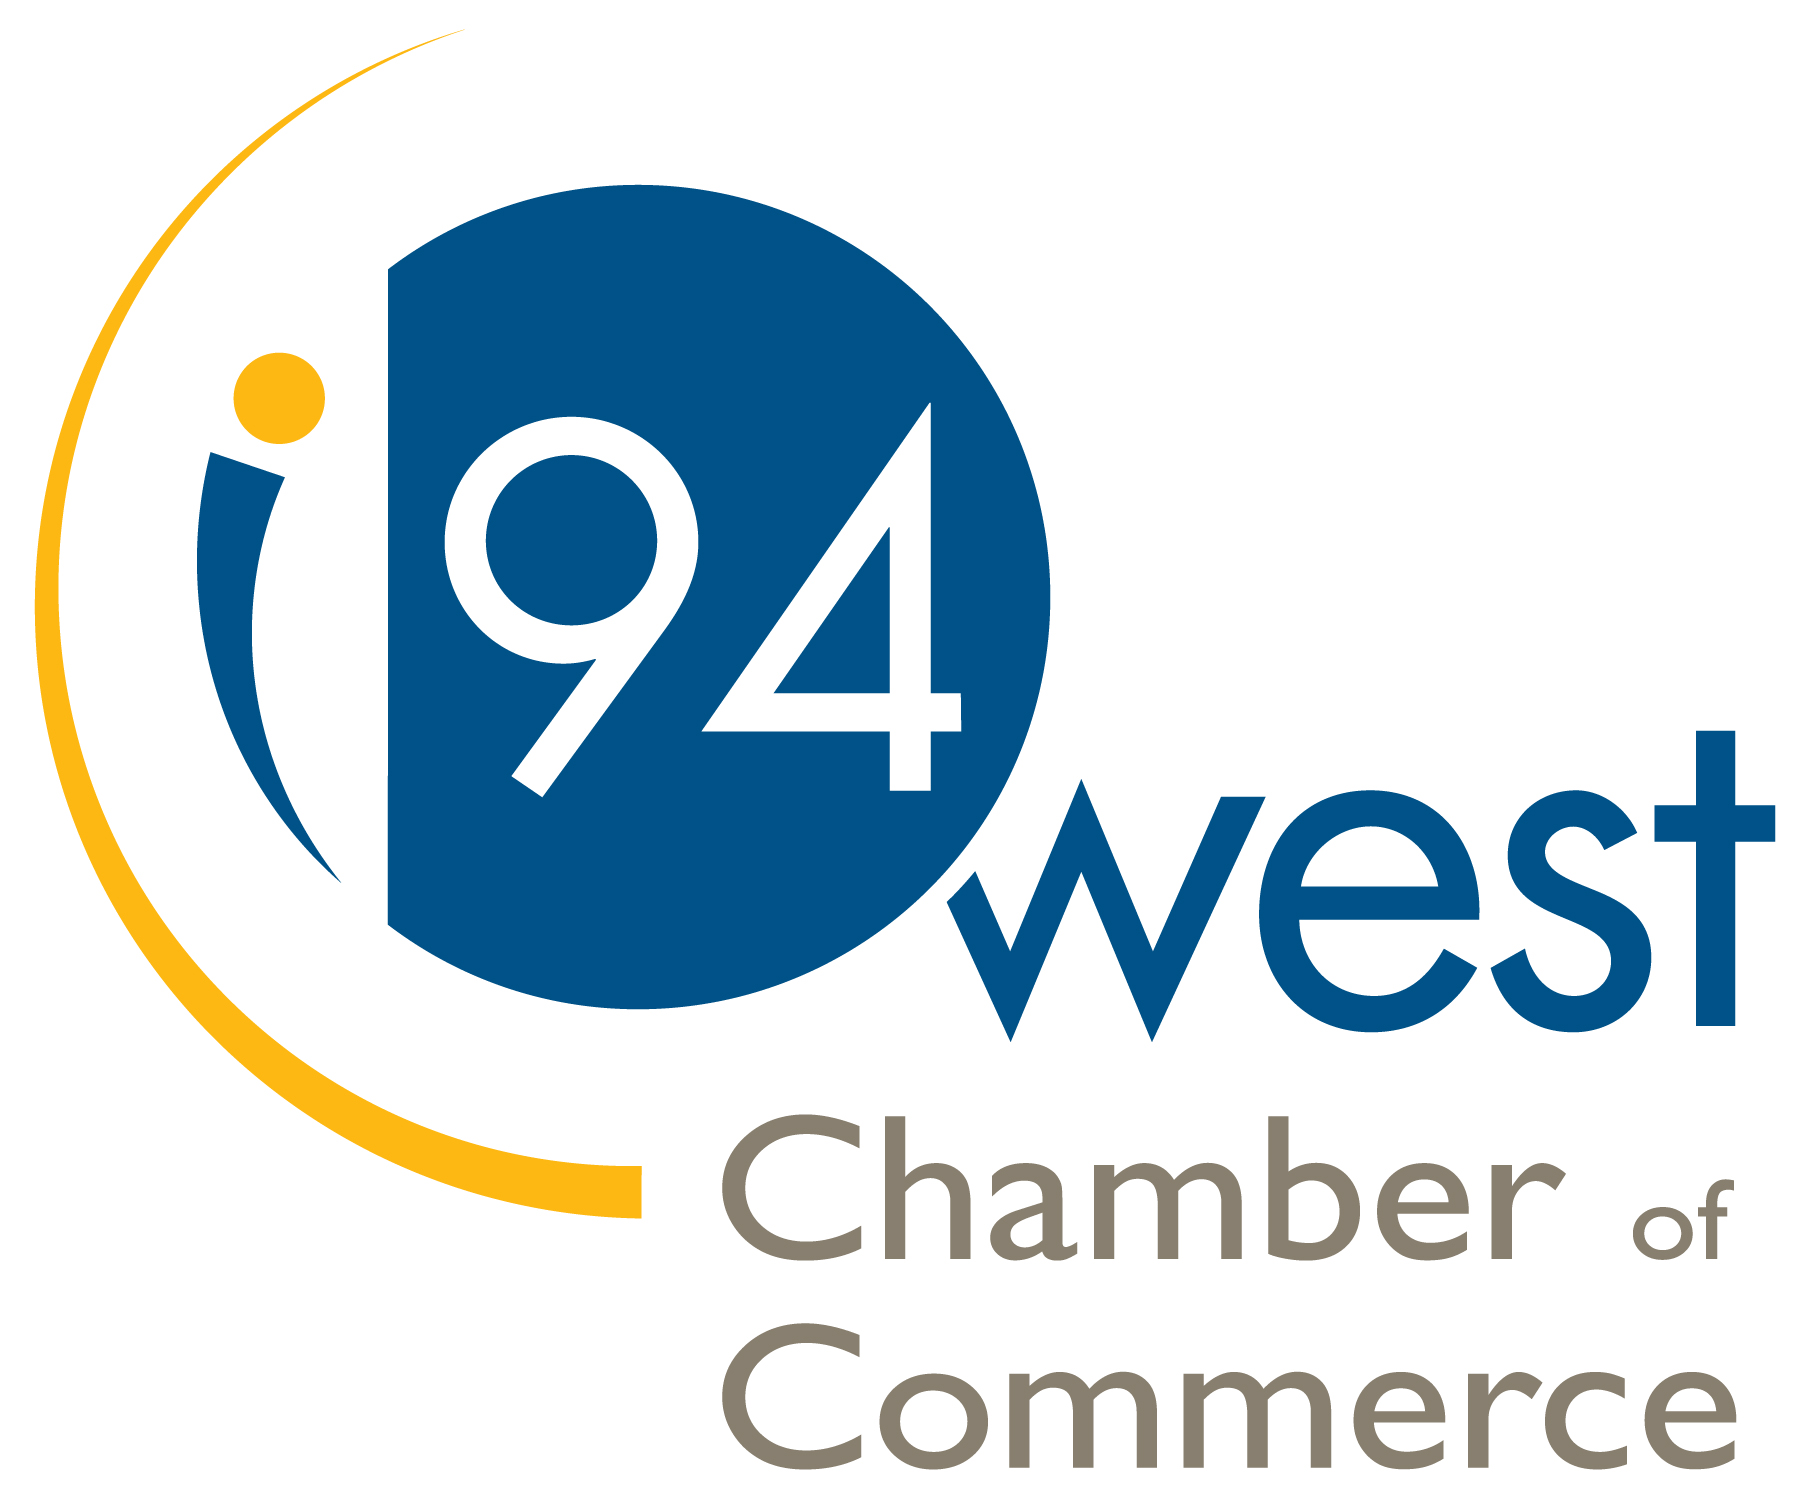 I-94 West Chamber of Commerce